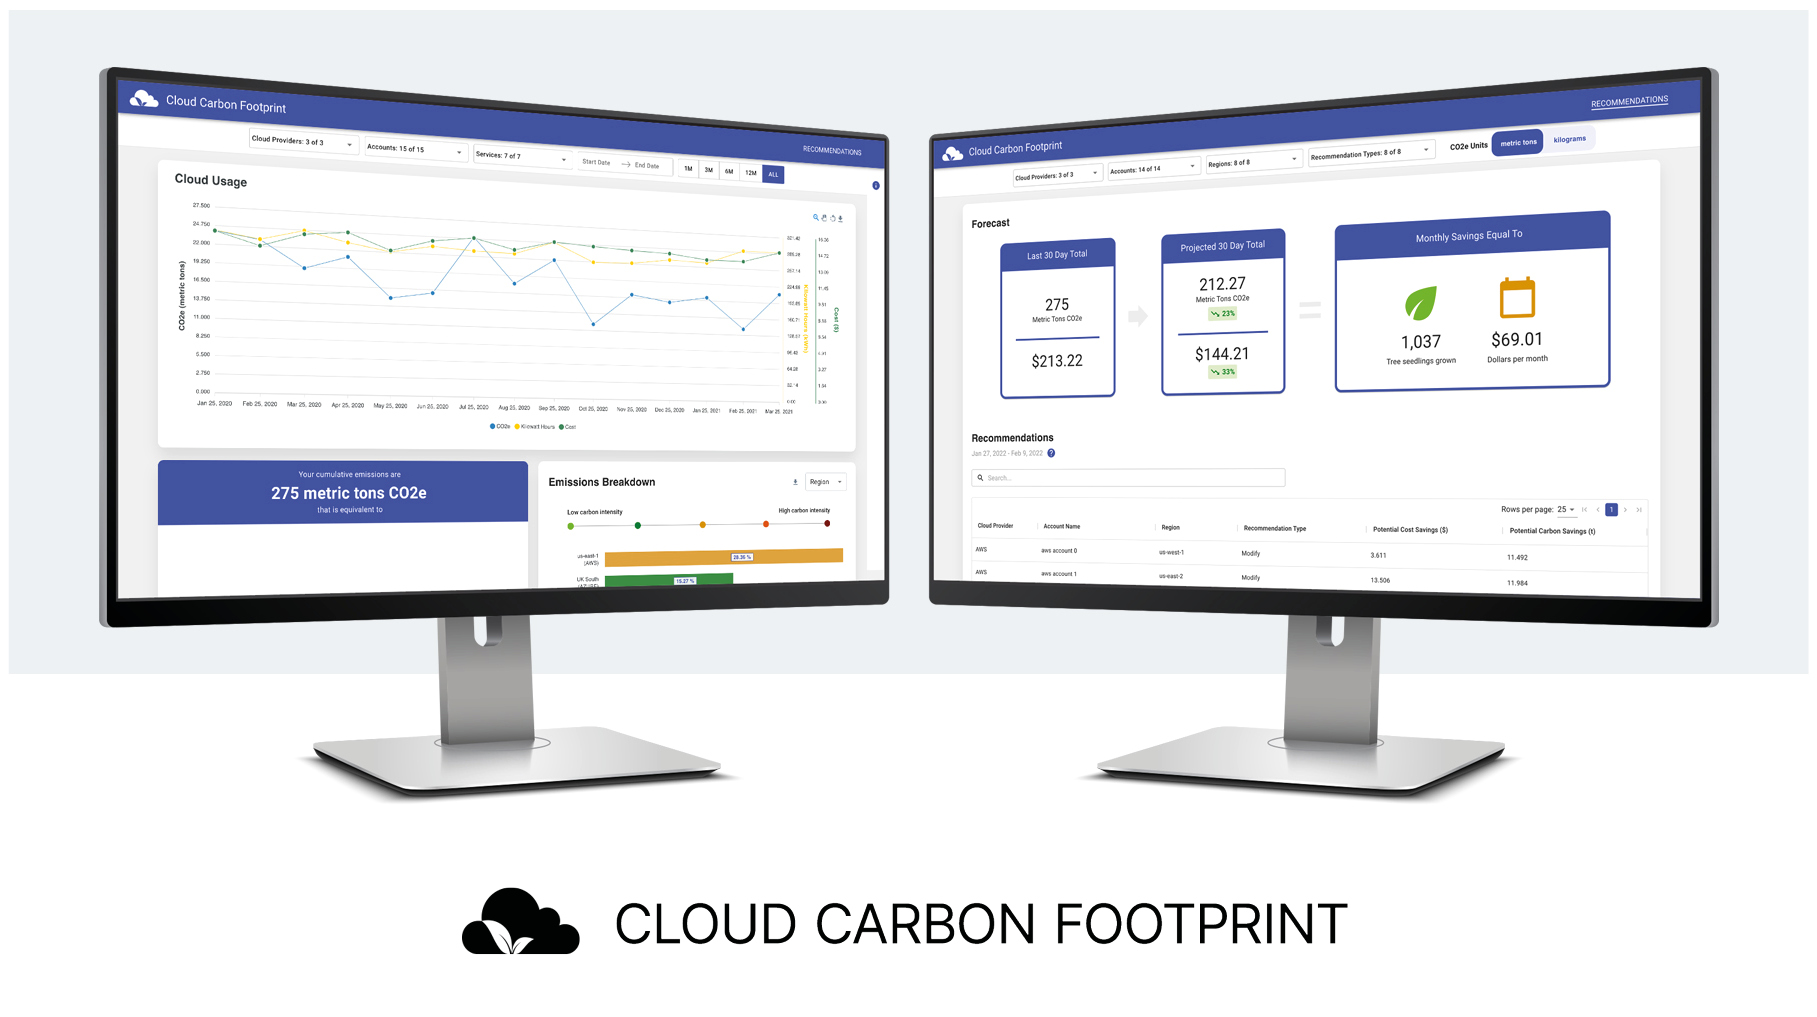 Computer displays showing the Cloud Carbon Footprint tools interface with graphs and purple boxes